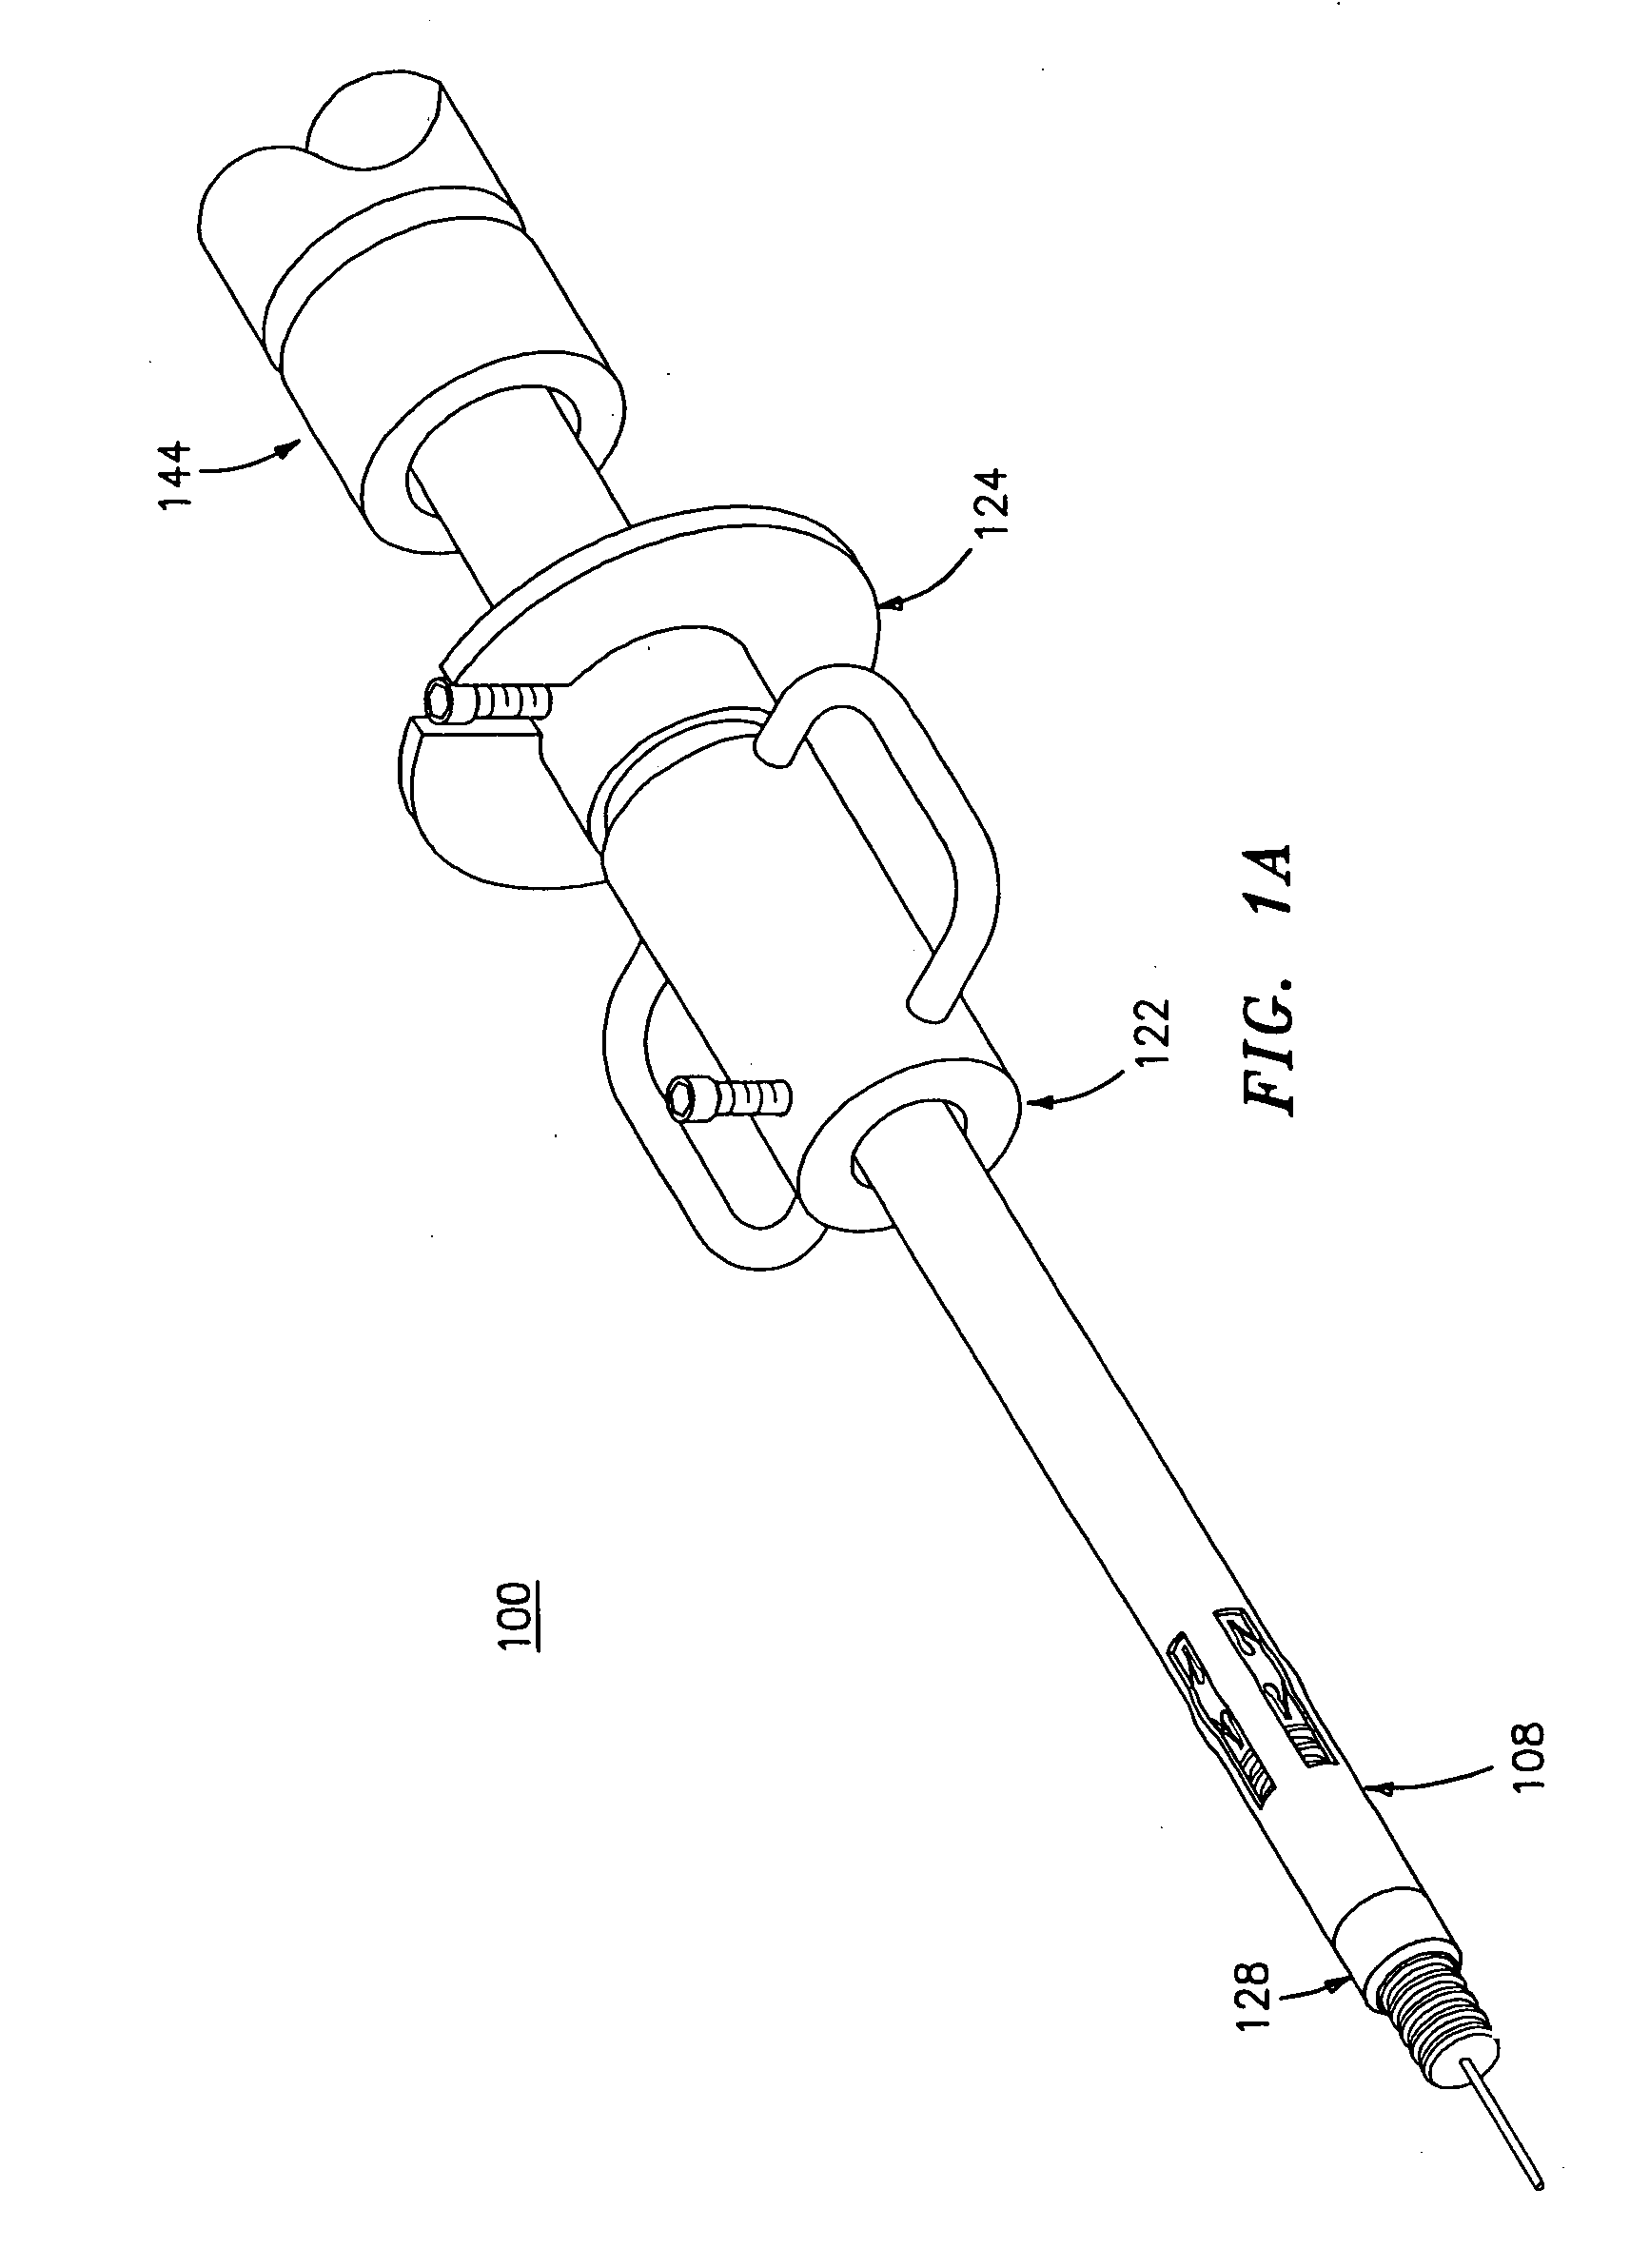 Method and appartus for anastomosis including an anchoring sleeve